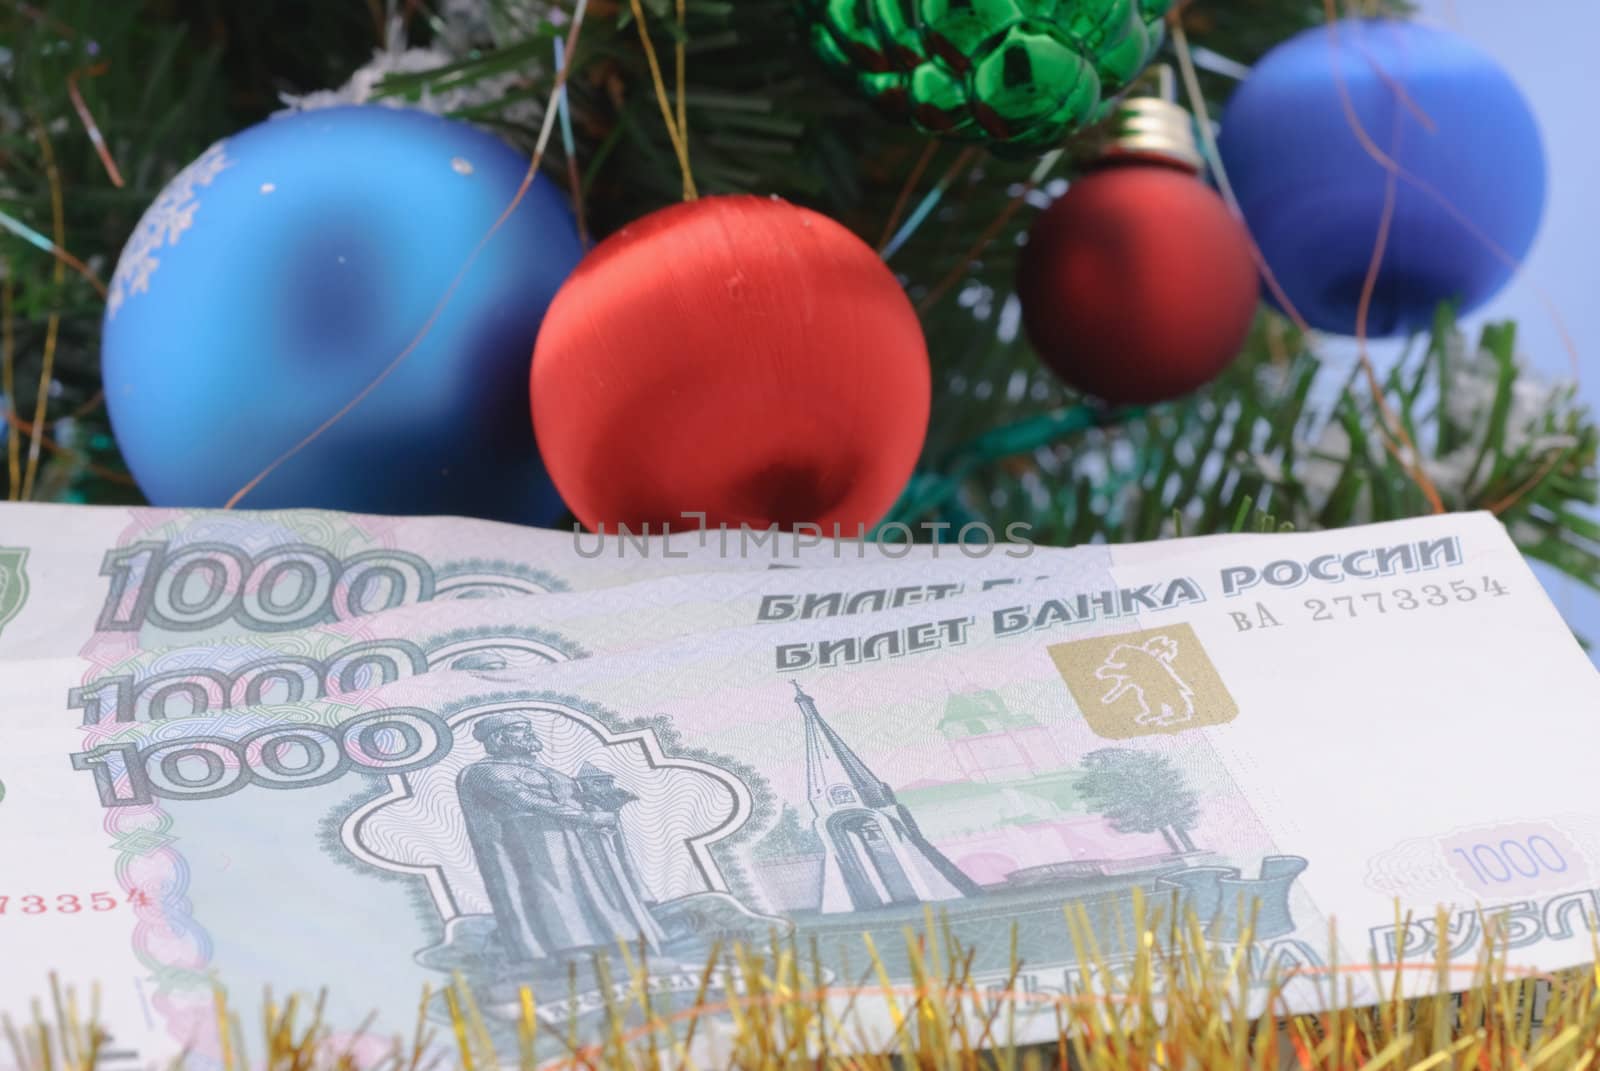 Russian ruble-Year's tree decoration in the New Year